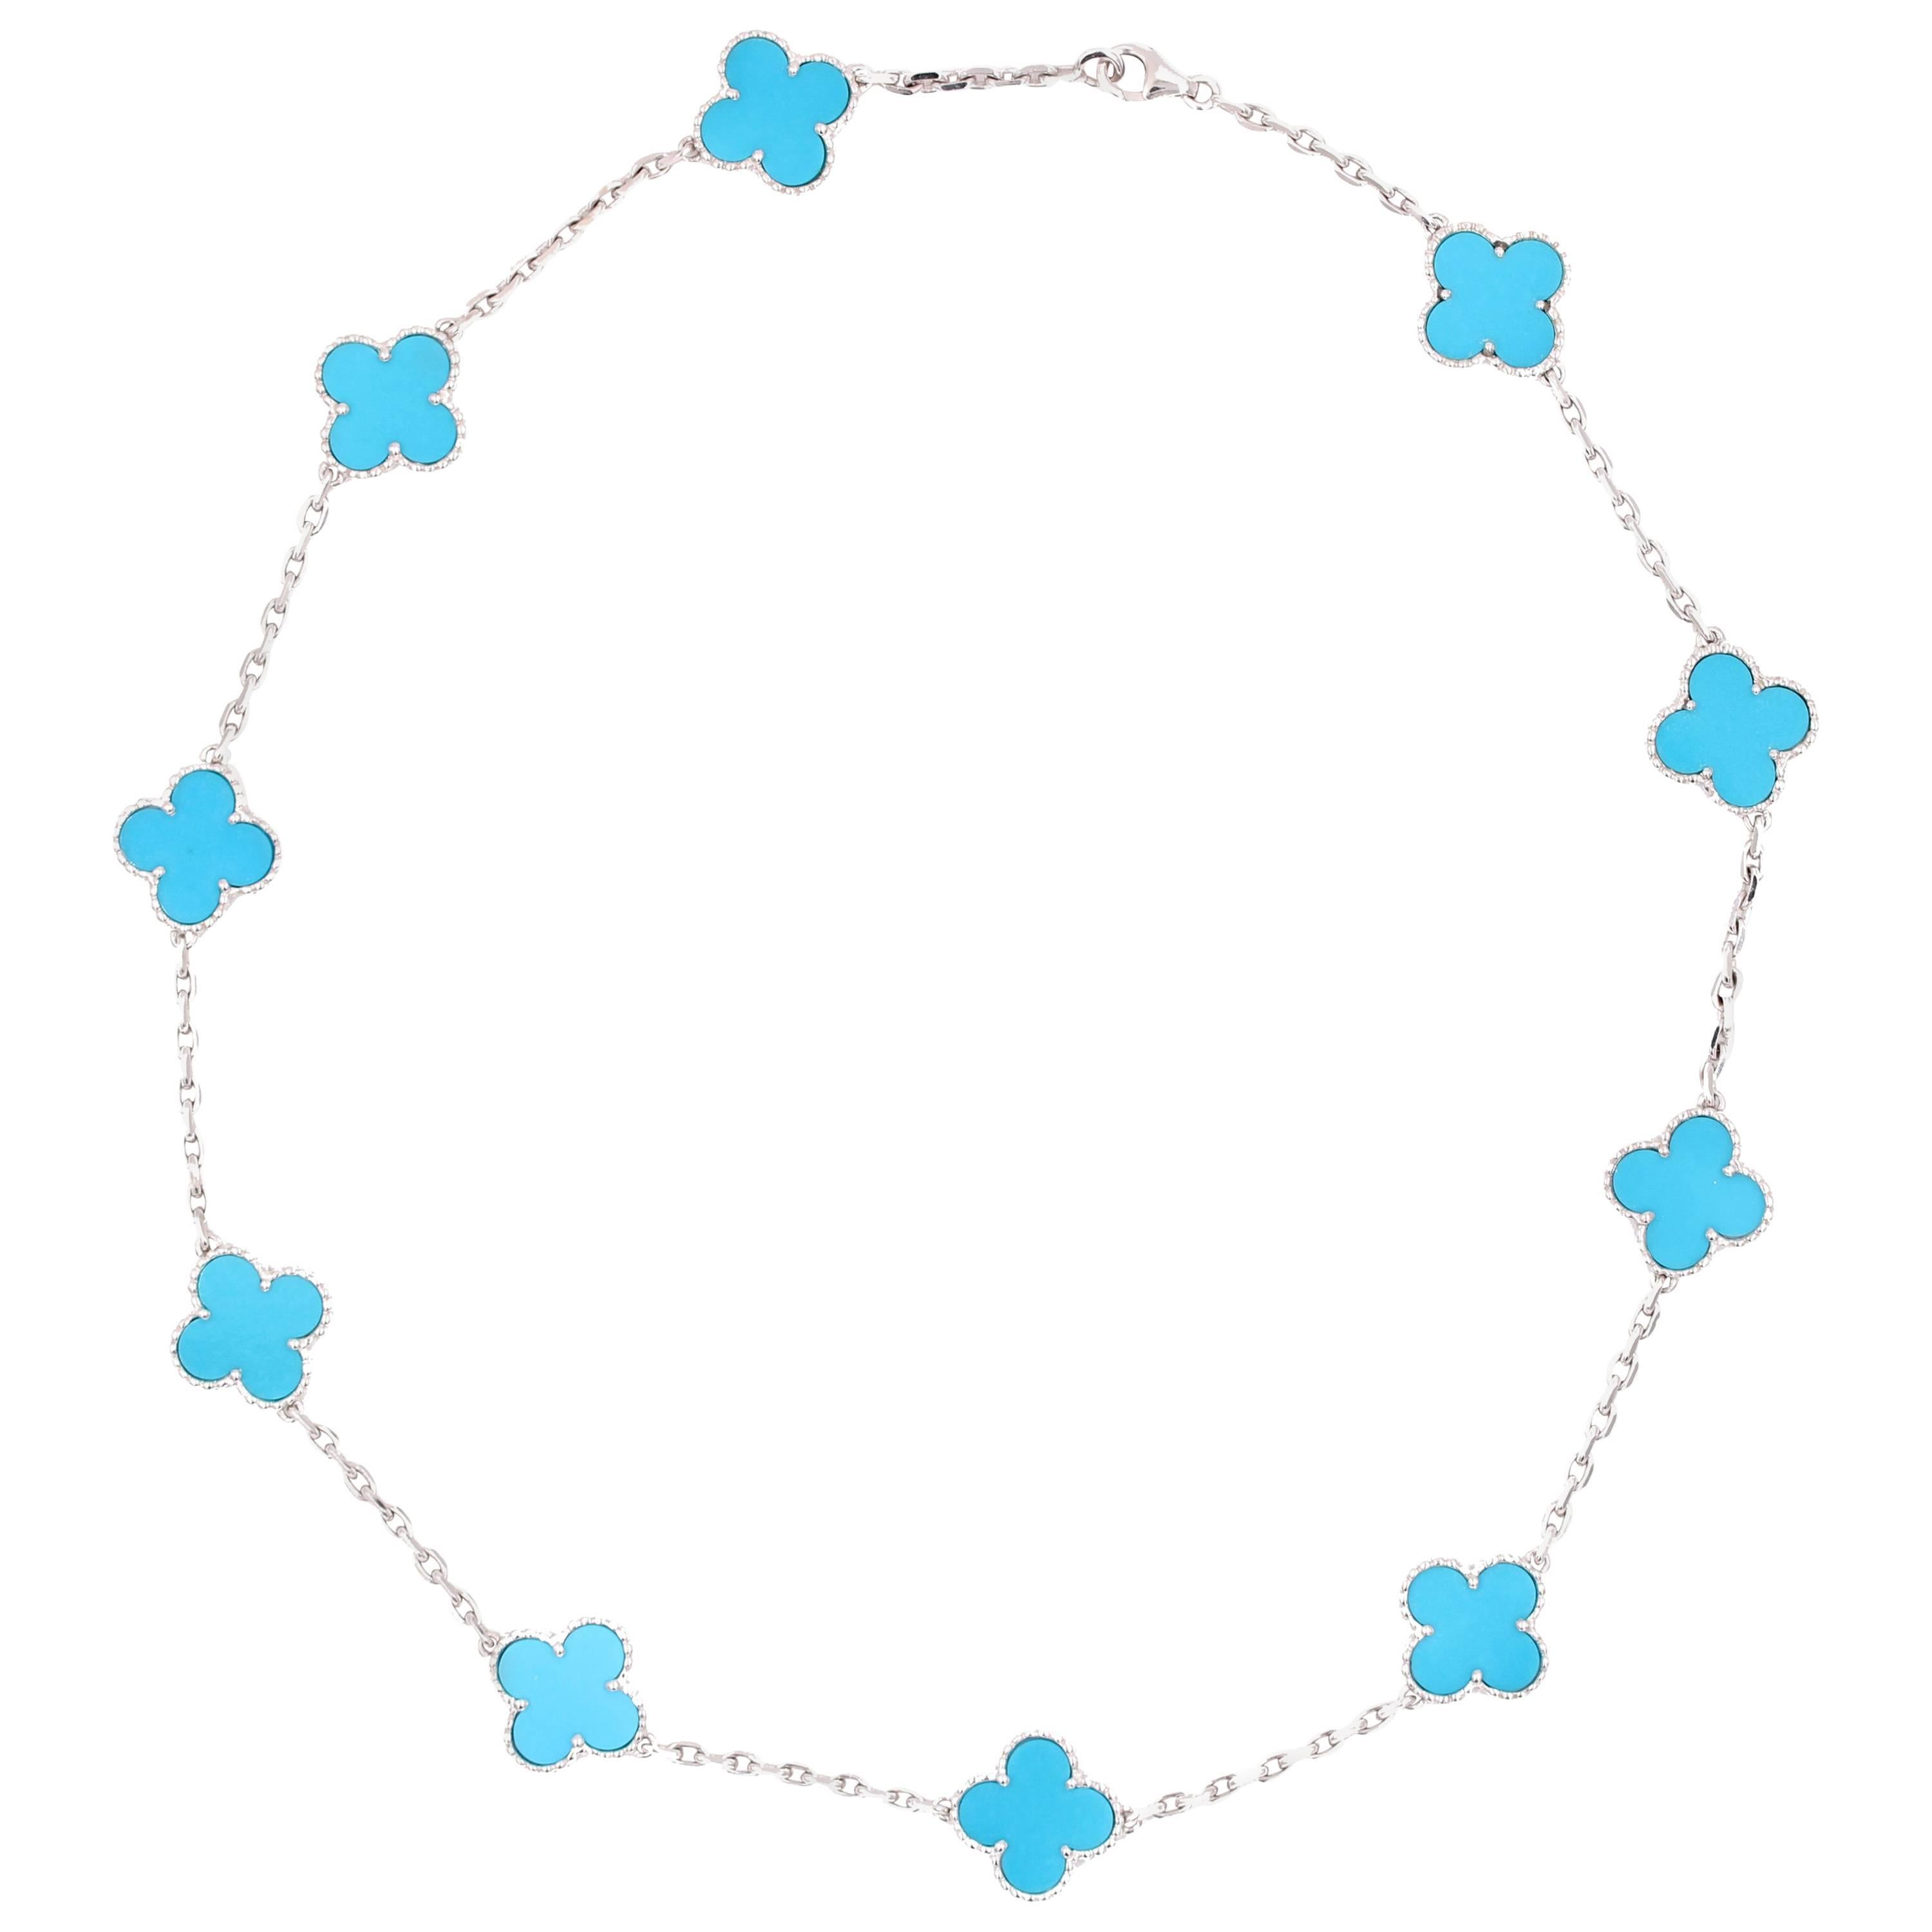 Van Cleef & Arpels Turquoise Alhambra White Gold Necklace